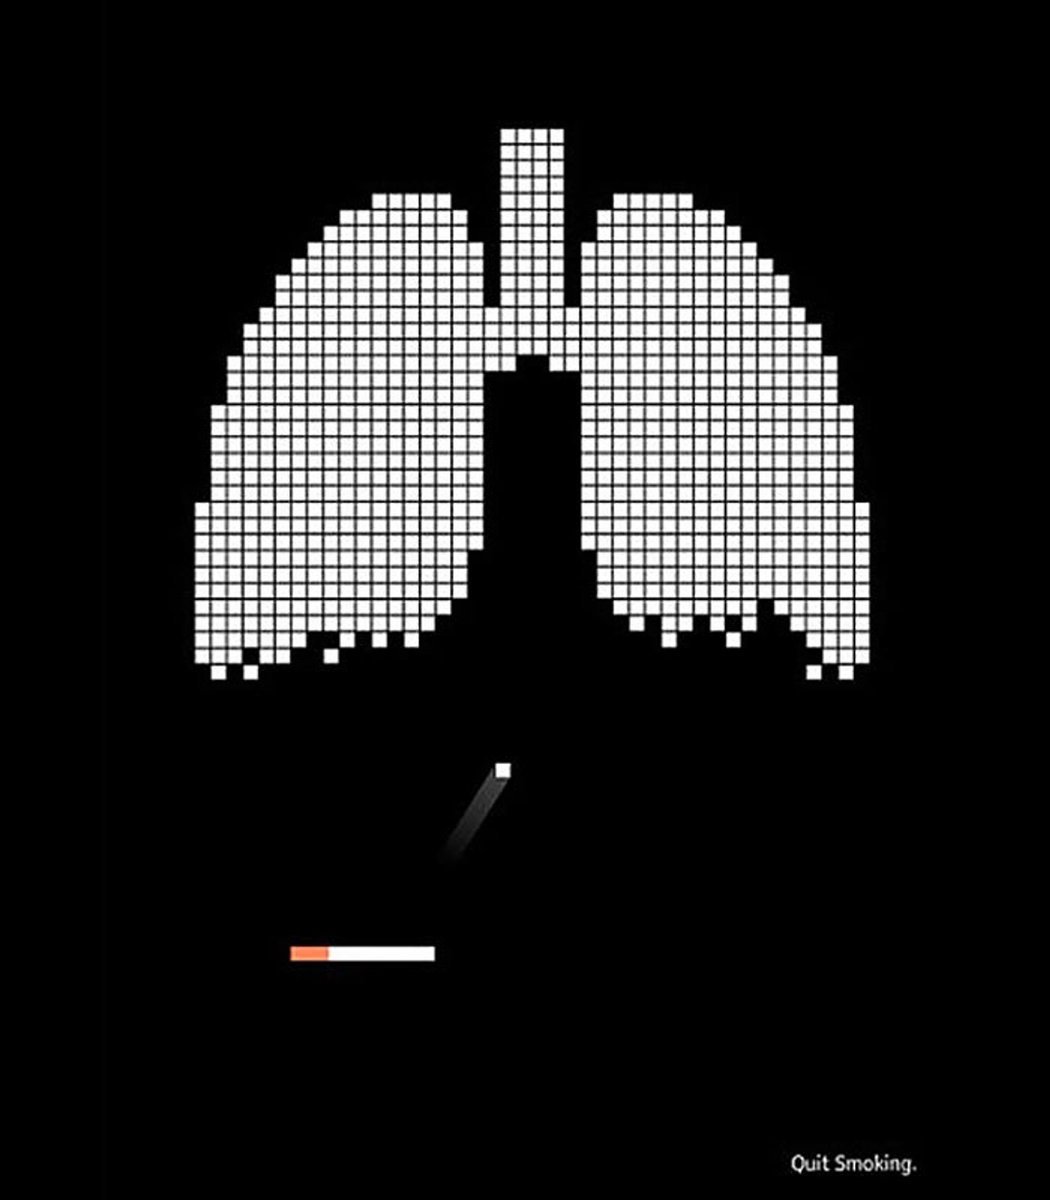 10 creative anti-smoking ads I've collected: 1. Lung Pong